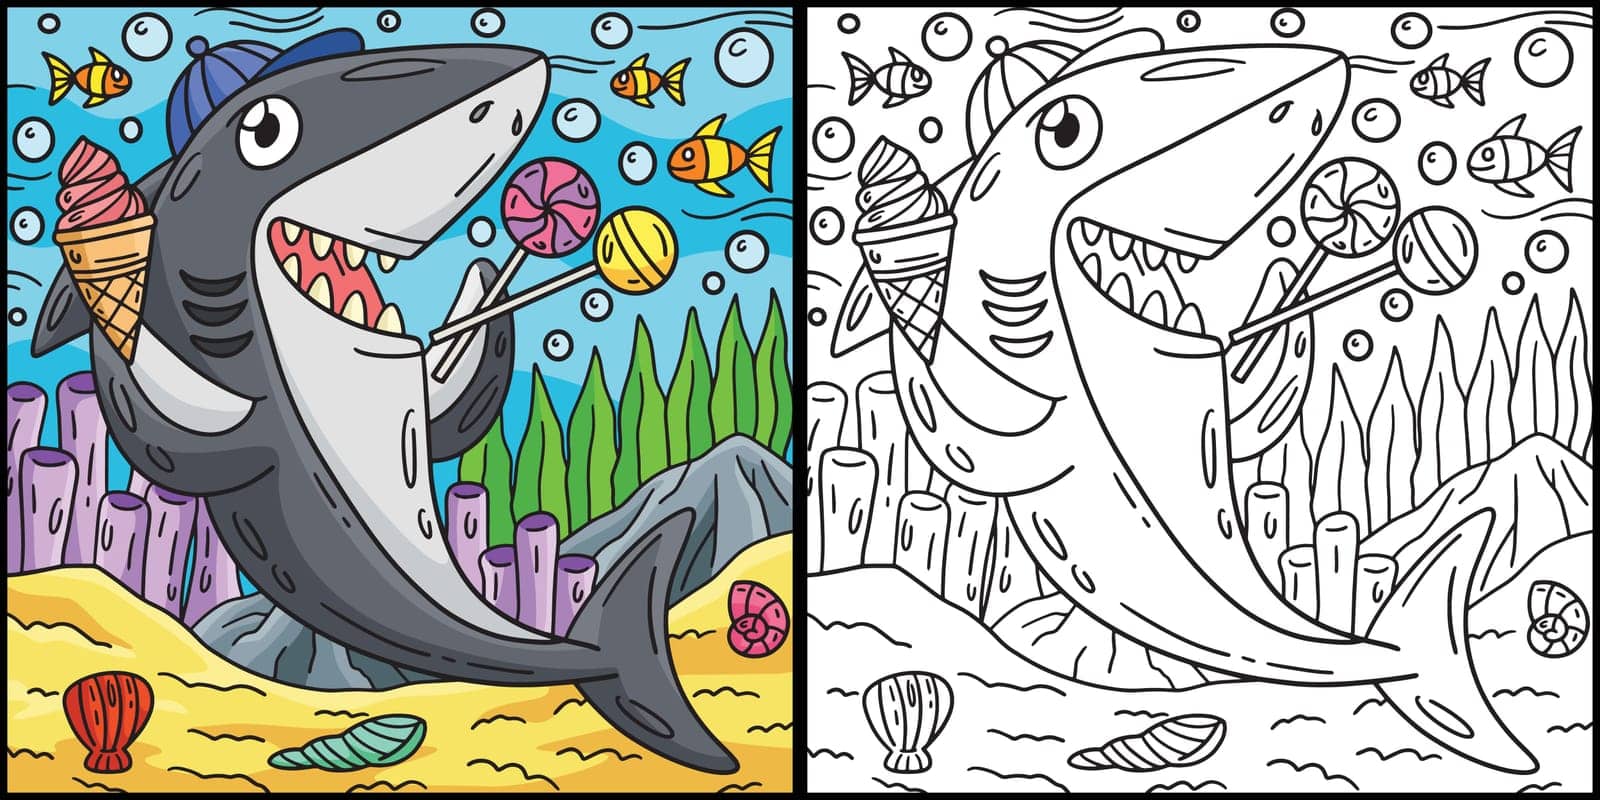 This coloring page shows a Shark with the Treat. One side of this illustration is colored and serves as an inspiration for children.